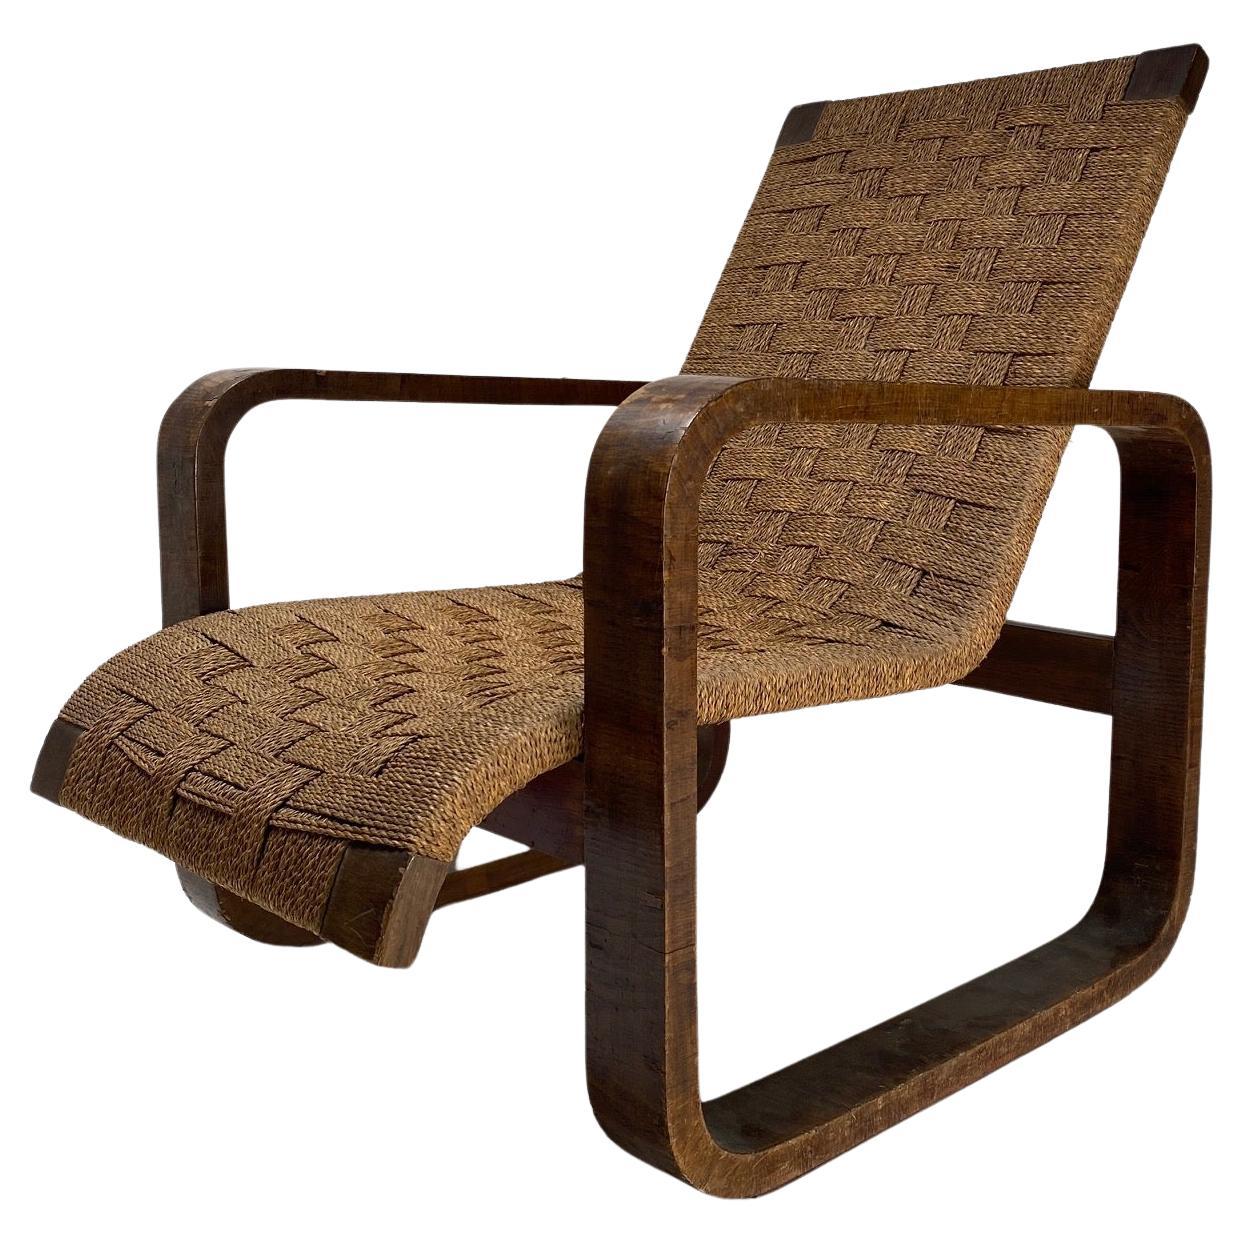 Sculptural Armchair in wood and rope, Giuseppe Pagano (Attr), Italy, 1940s For Sale